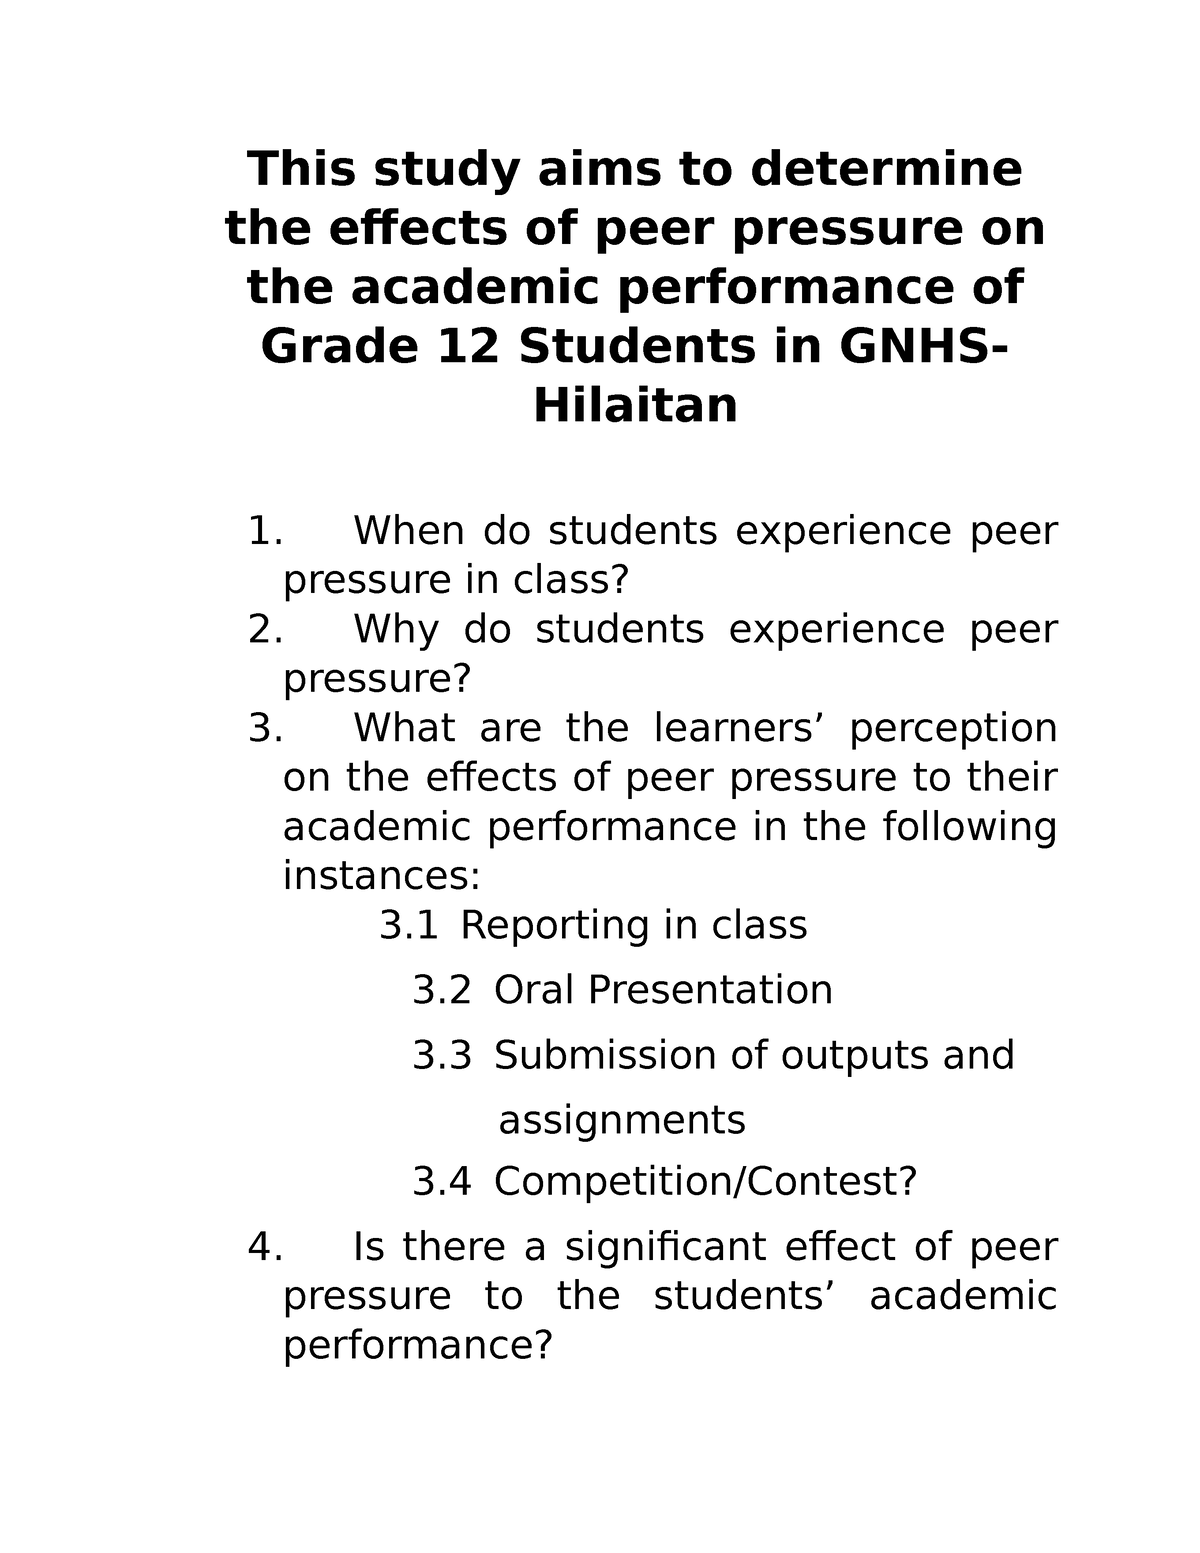 peer-pressure-survey-questionnaire-this-study-aims-to-determine-the